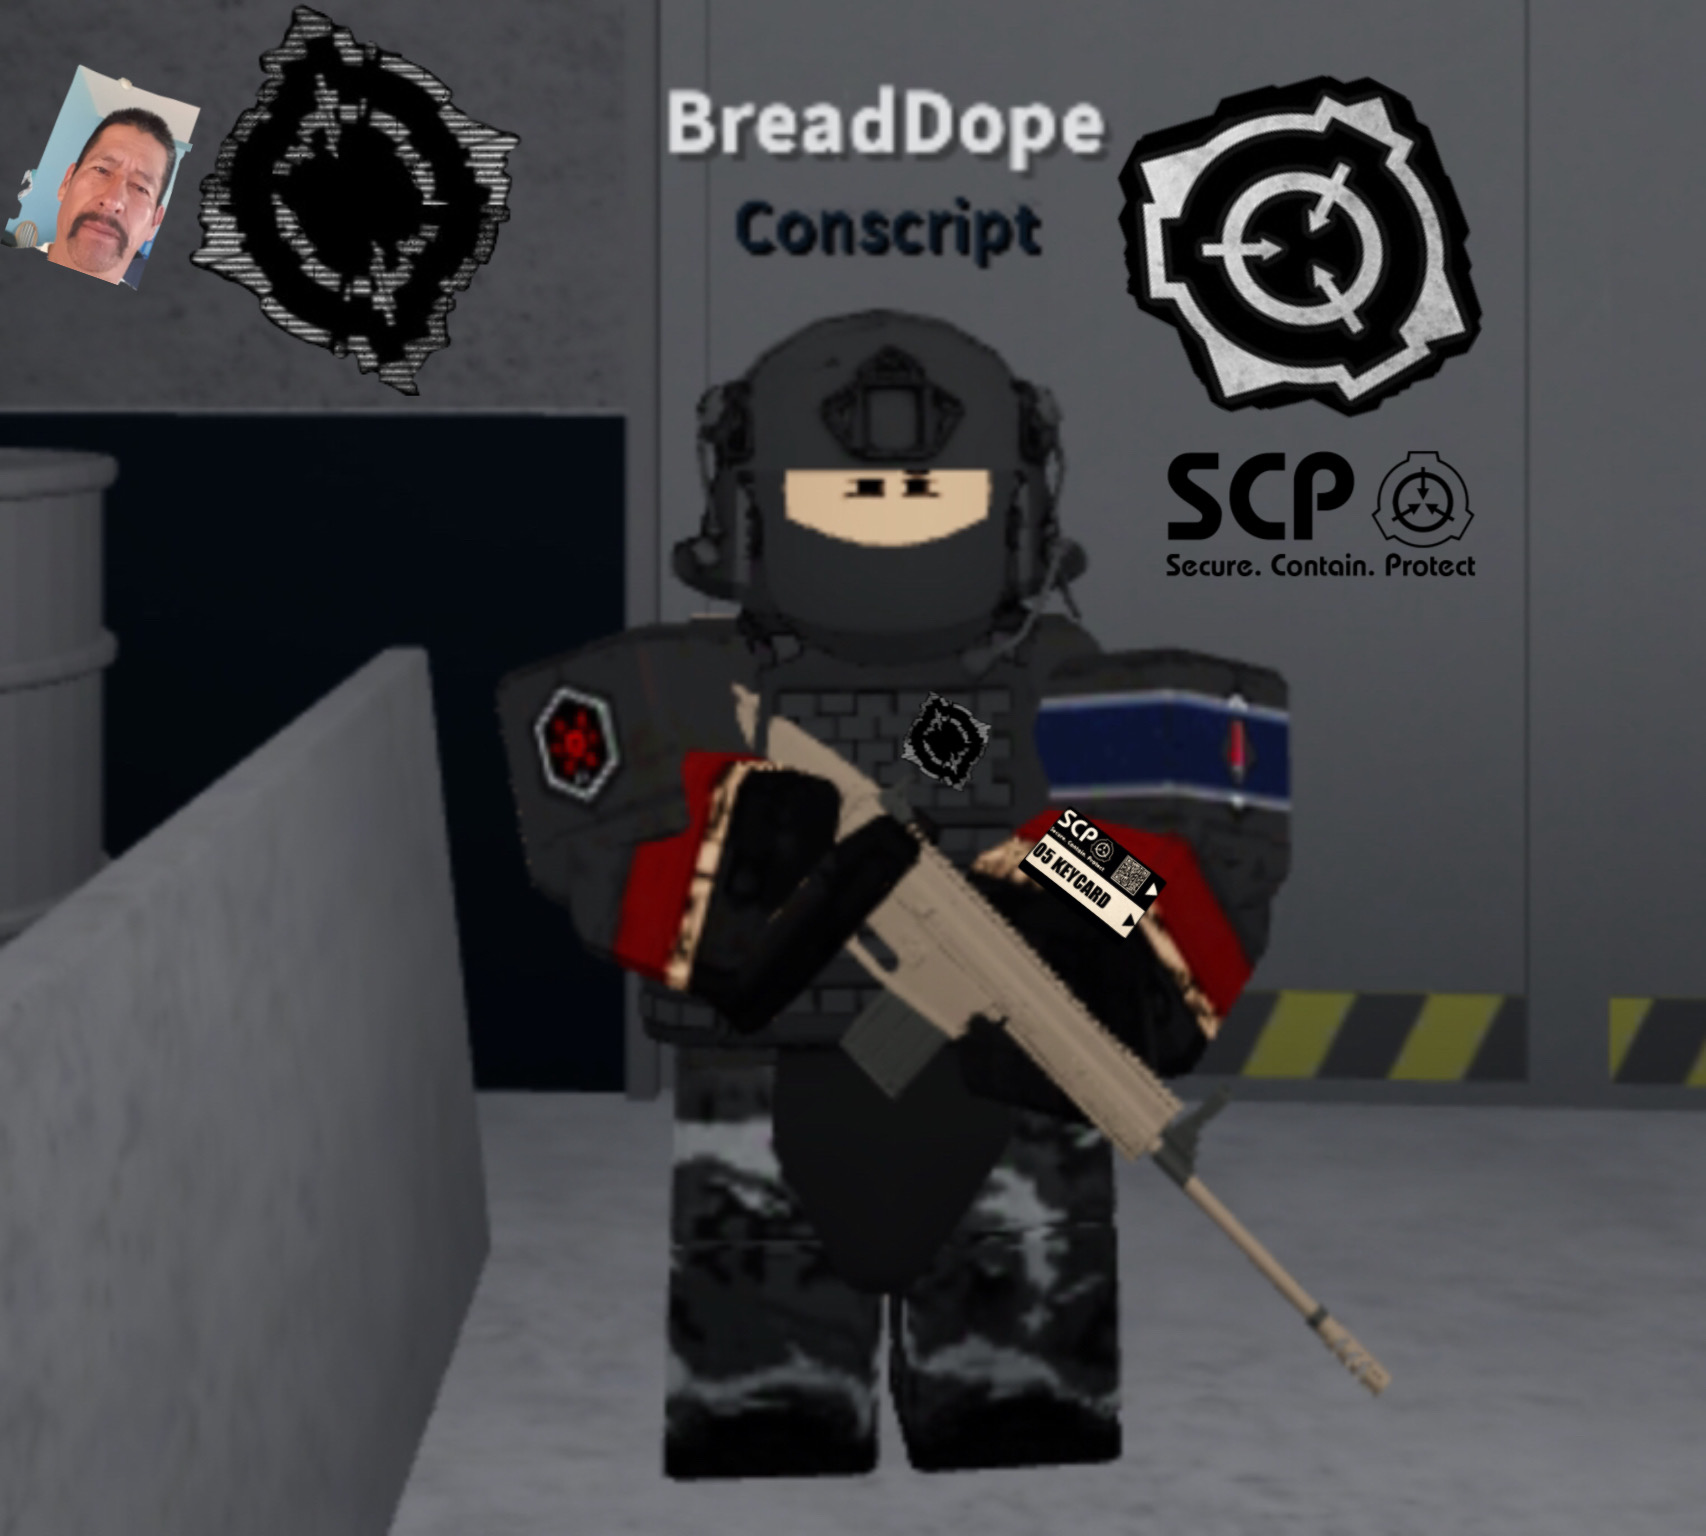 Scp Chaos Insurgency Base Meme Image By Racerconnor93